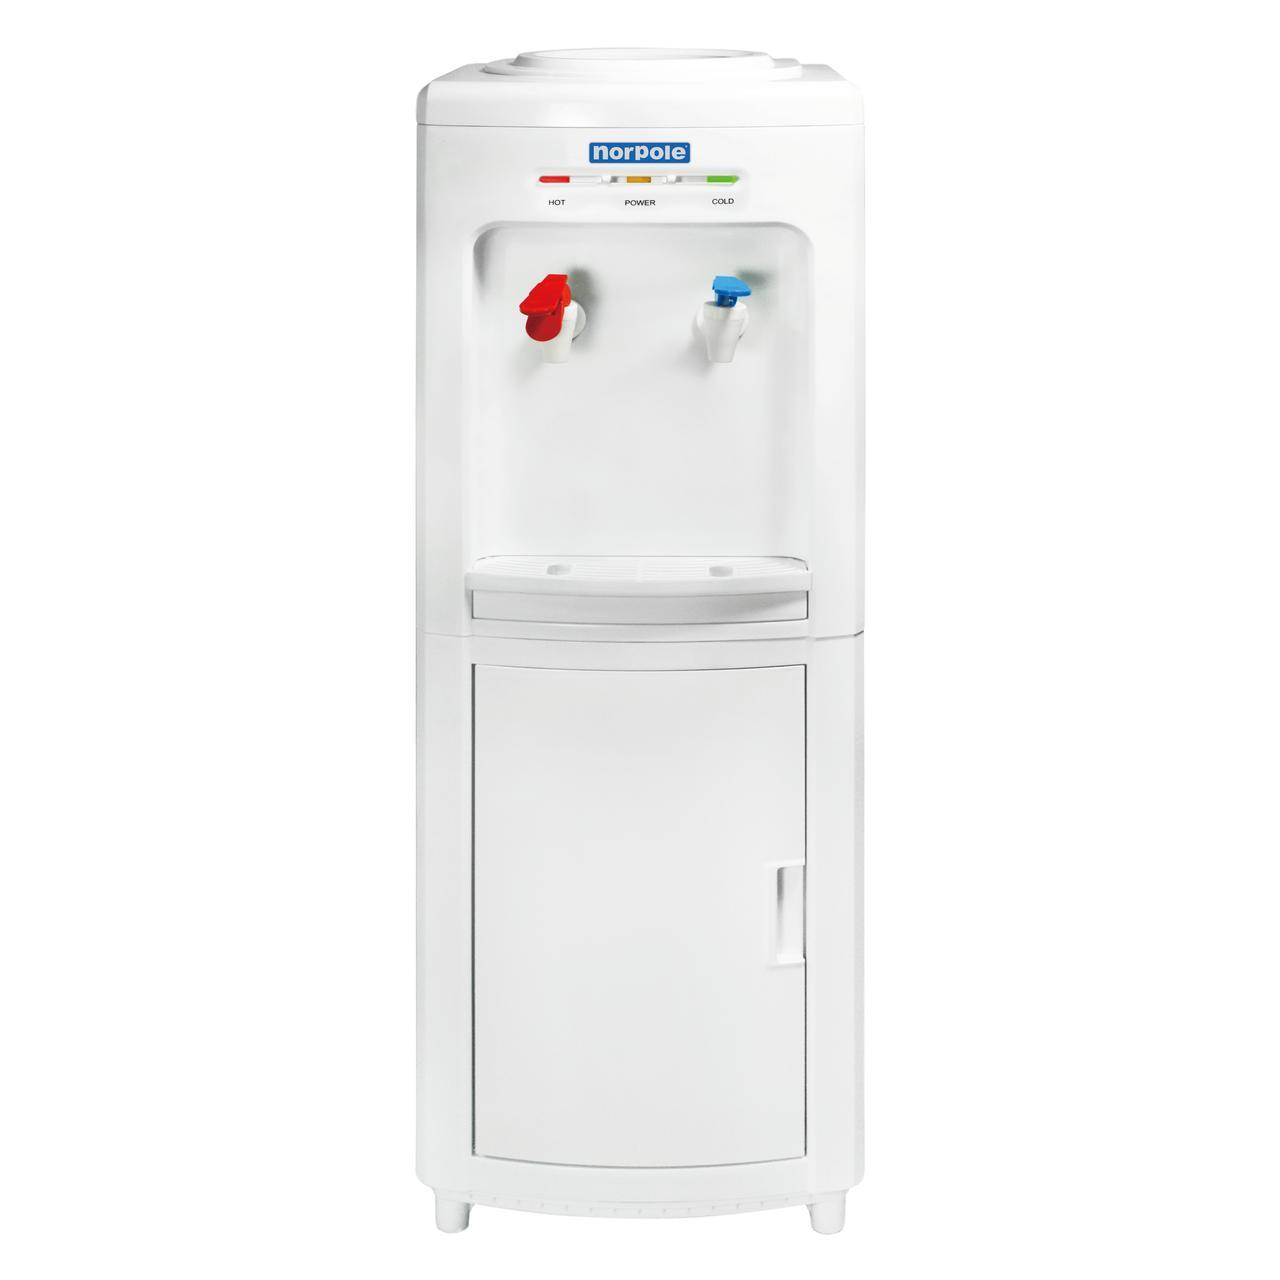 Norpole Thermo-Electric Water Dispenser for $57.02 Shipped